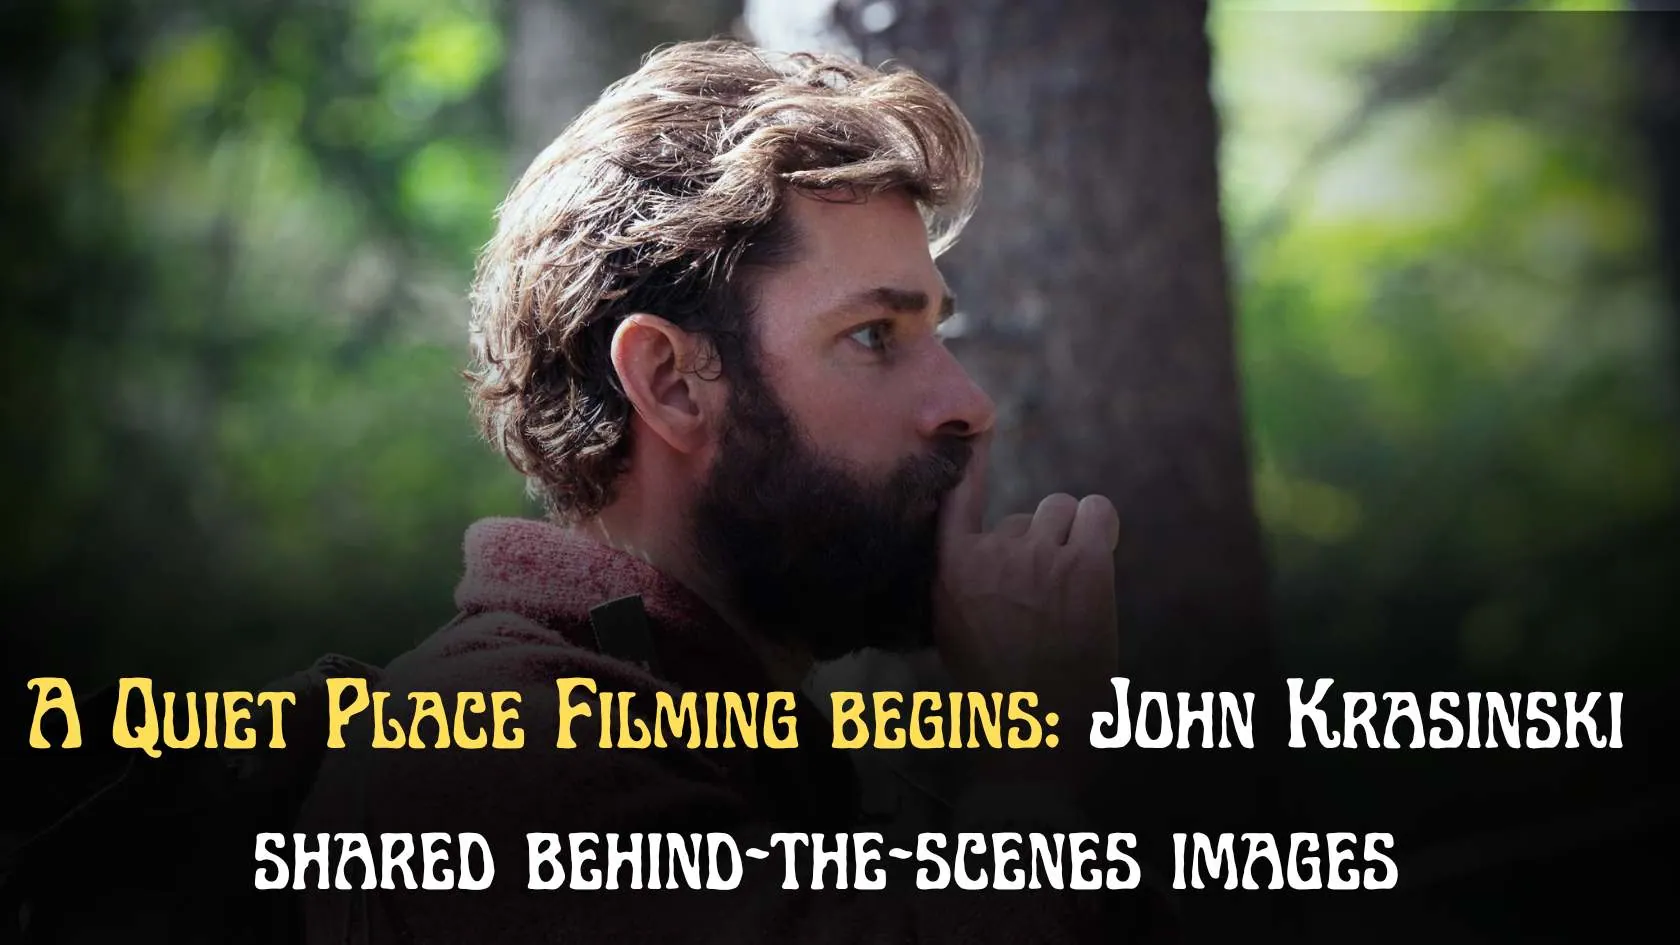 A Quiet Place Filming begins John Krasinski shared behind-the-scenes images